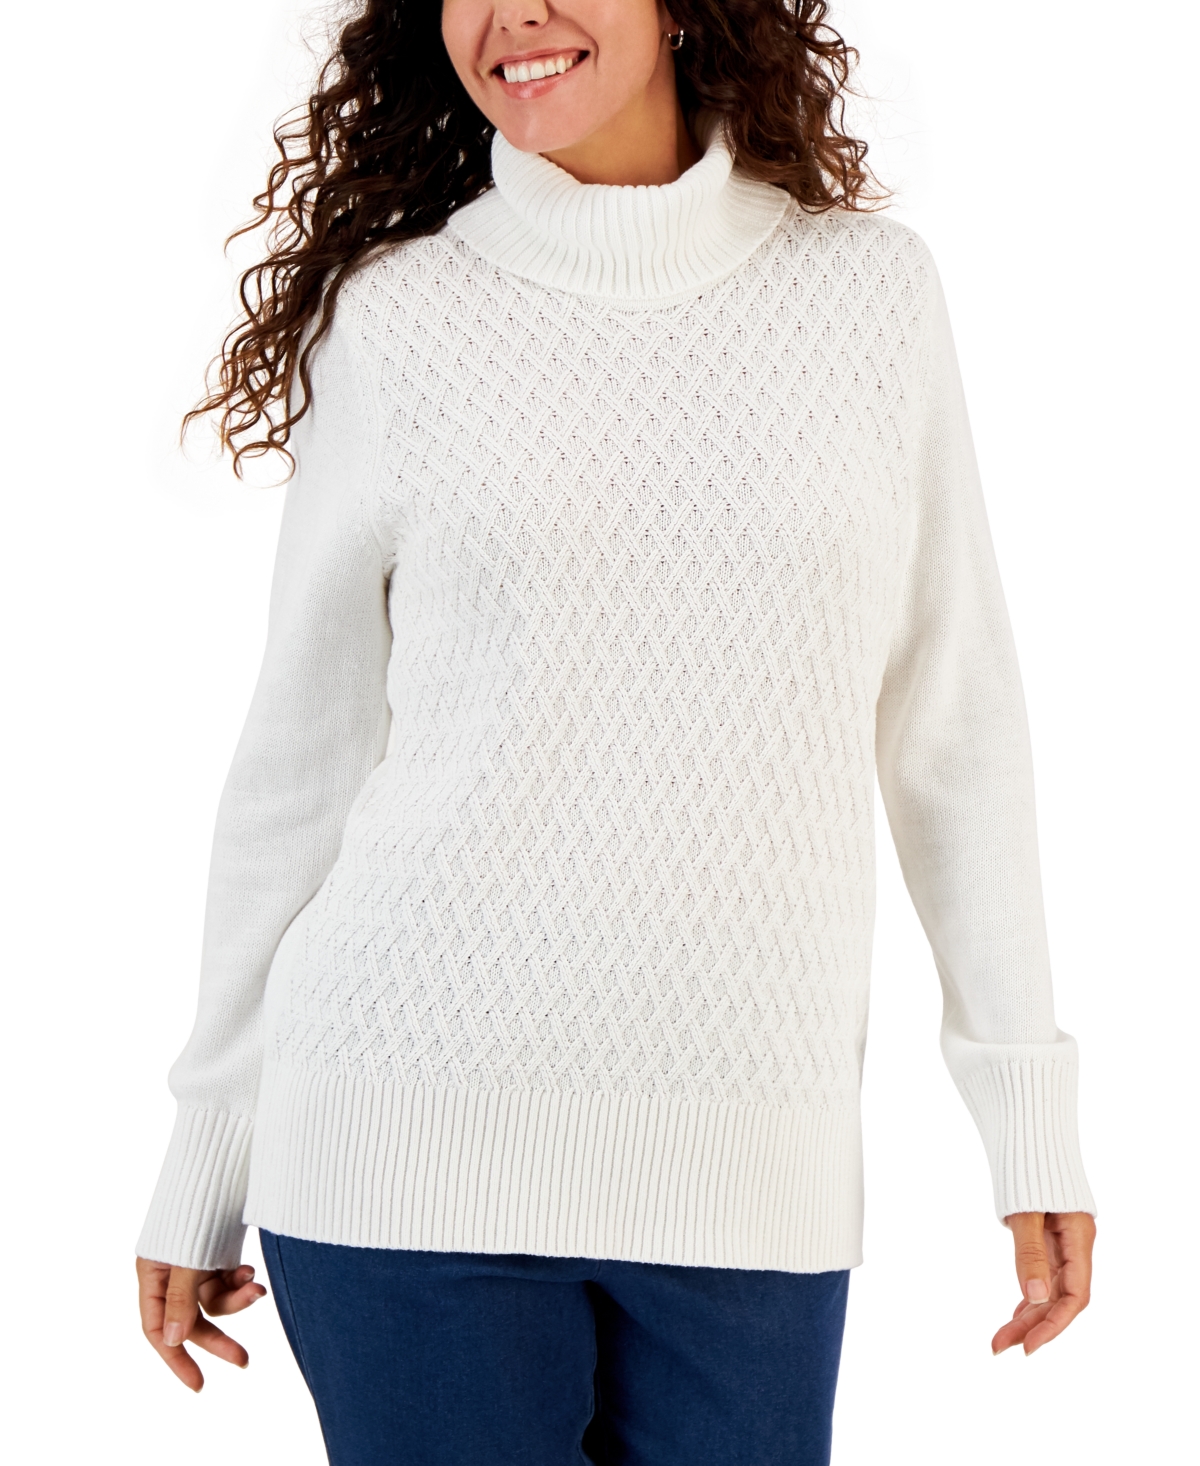 Women's Cable-Knit Turtleneck Cotton Sweater, Created for Macy's - Winter White